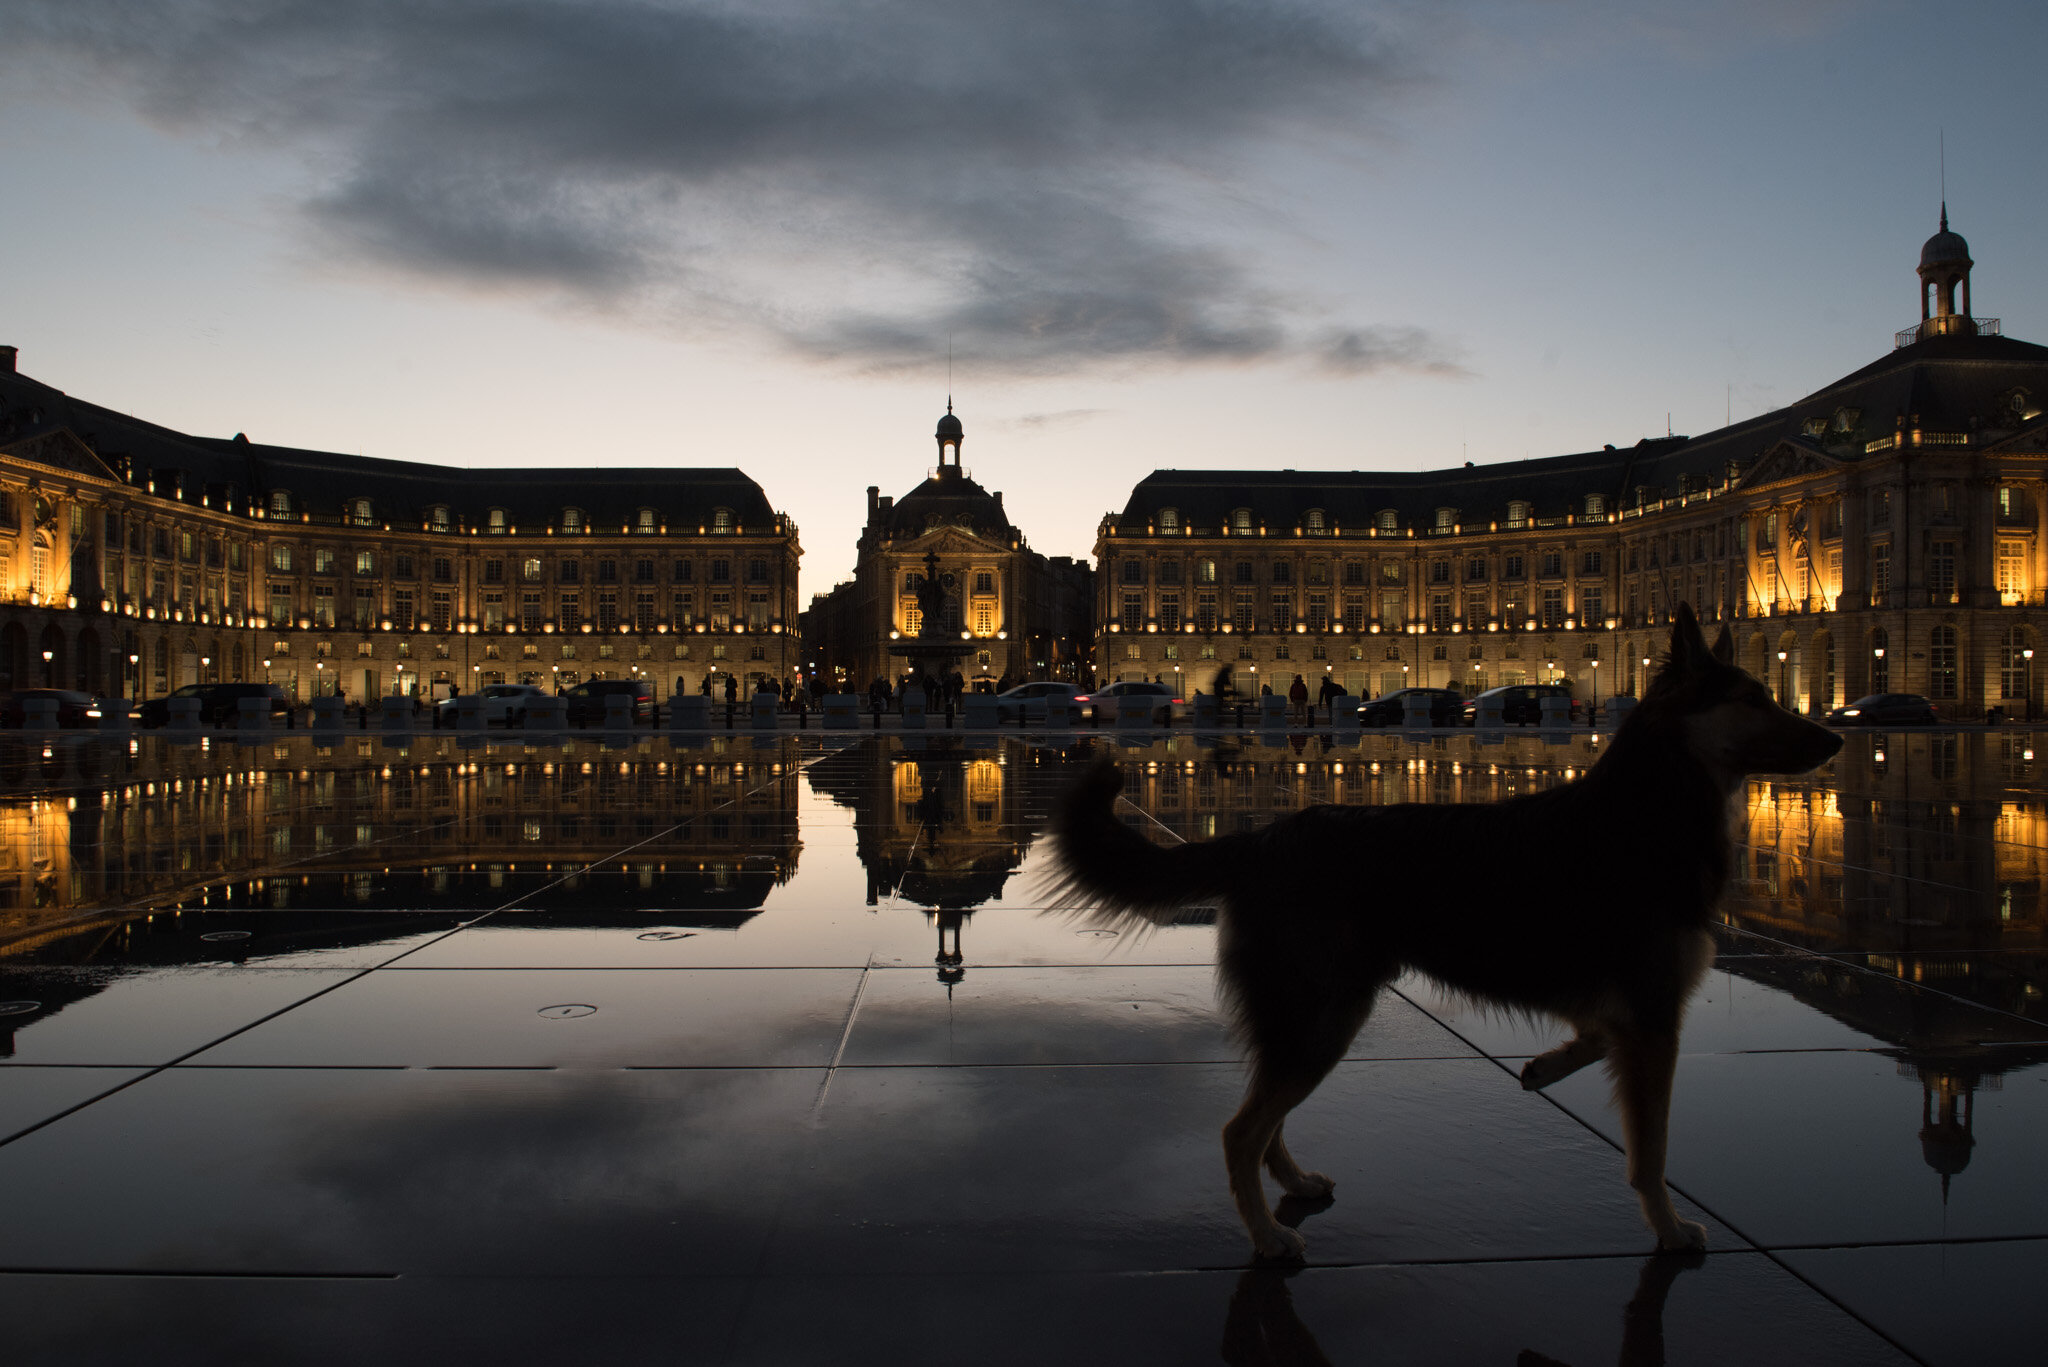    'Bordeaux' National Geographic U.K.    Place de la Bourse. Dog in front of reflecting pool. 